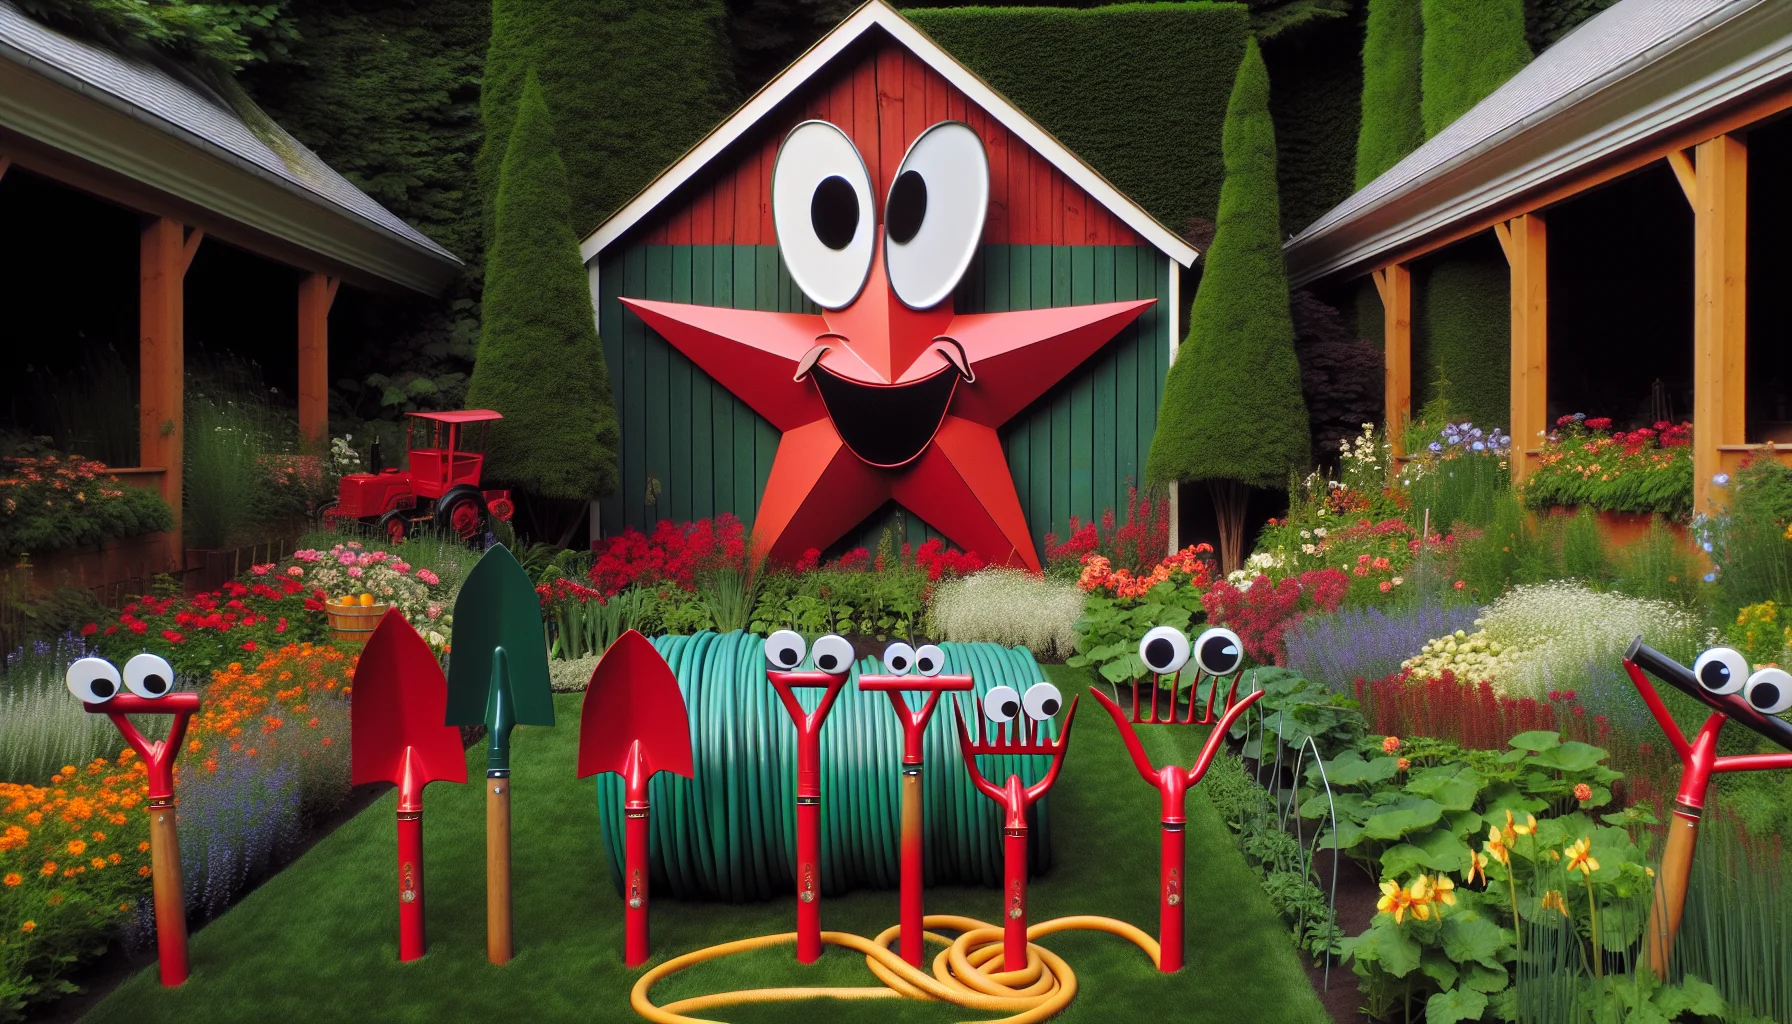 An image showcasing a large red barn star displayed in a lush garden. The garden is filled with a variety of colorful flowers, tall green trees, and a quaint little vegetable patch. The barn star seems to be 'guiding' a group of garden tools that have been whimsically anthropomorphized - a shovel with googly eyes, a rake grinning widely, a hose coiled like a snake, all appearing to follow the star. This charming scenario is intended to evoke a sense of fun and encourage people to take up gardening as a joyful hobby.